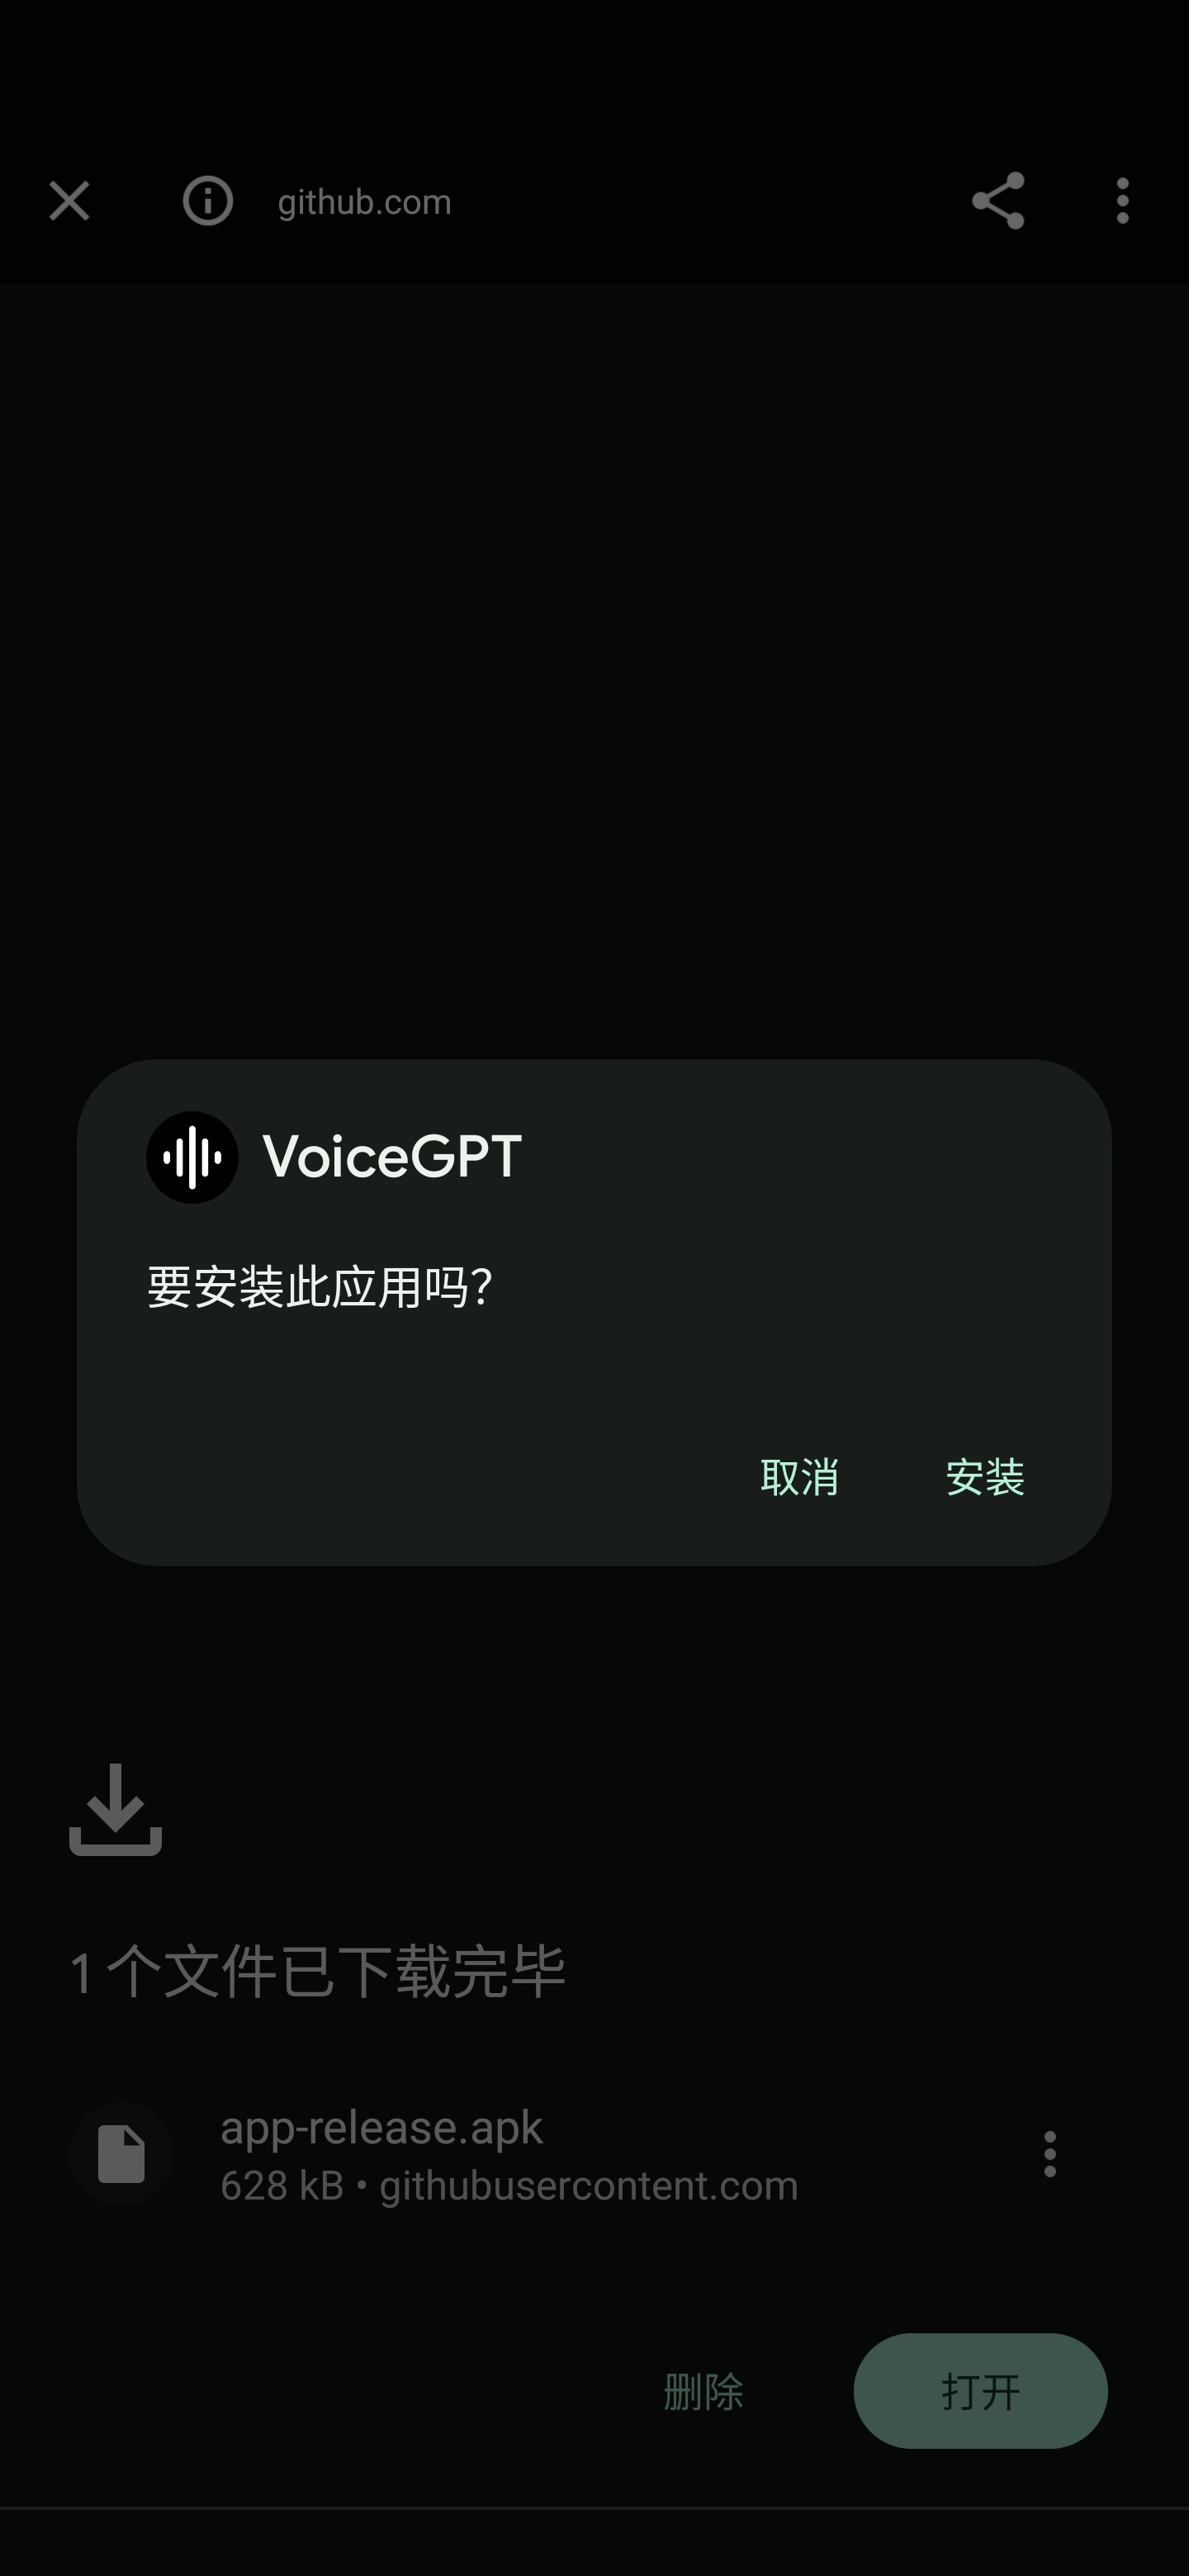 install VoiceGPT